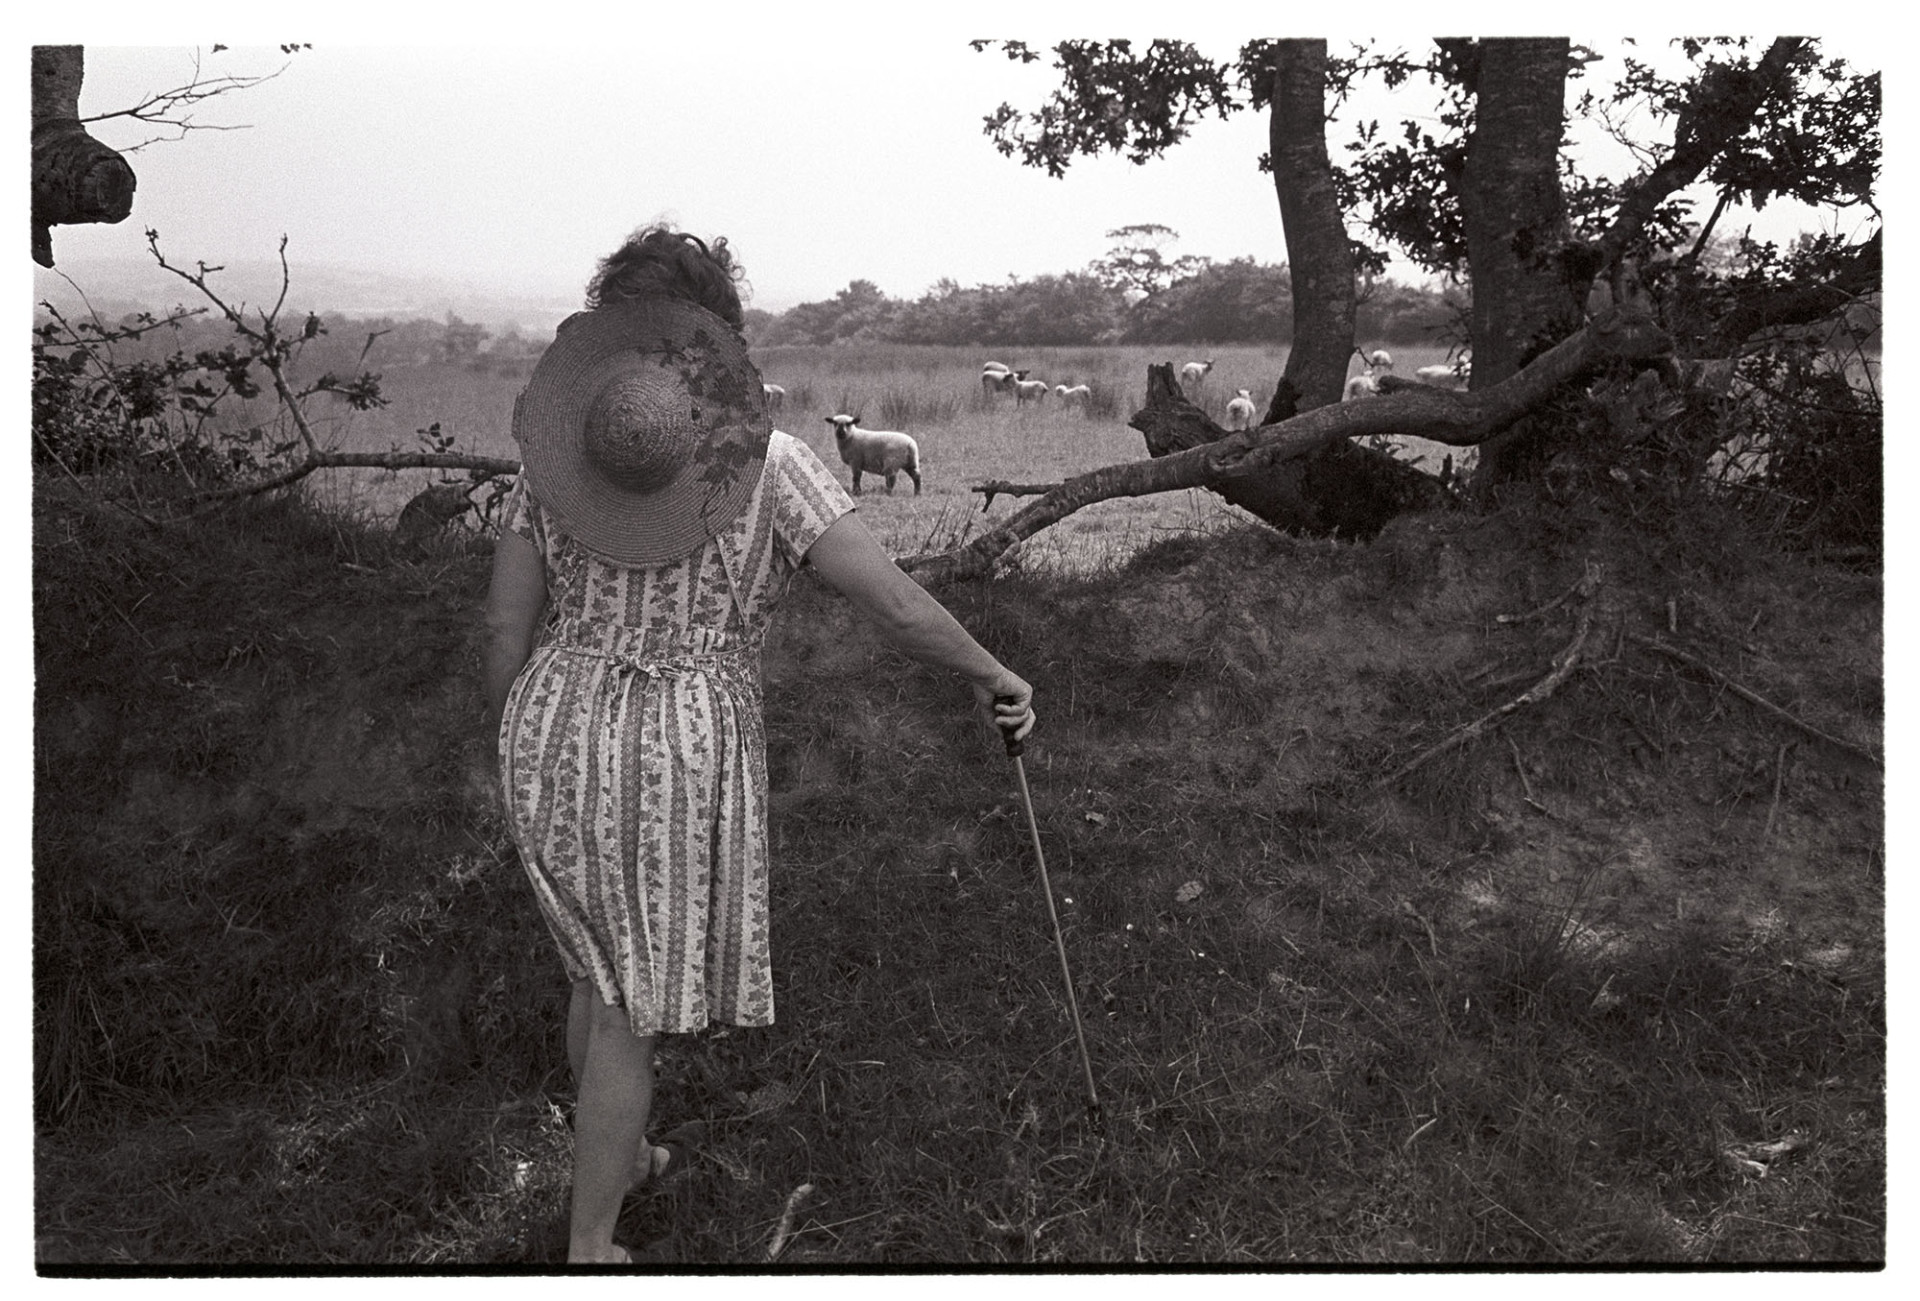 Woman checking sheep, sun hat.
[Mrs Oke looking over a hedge checking sheep in a field at Deckport, Hatherleigh. She has holding a walking stick and is wearing a straw sun hat.]